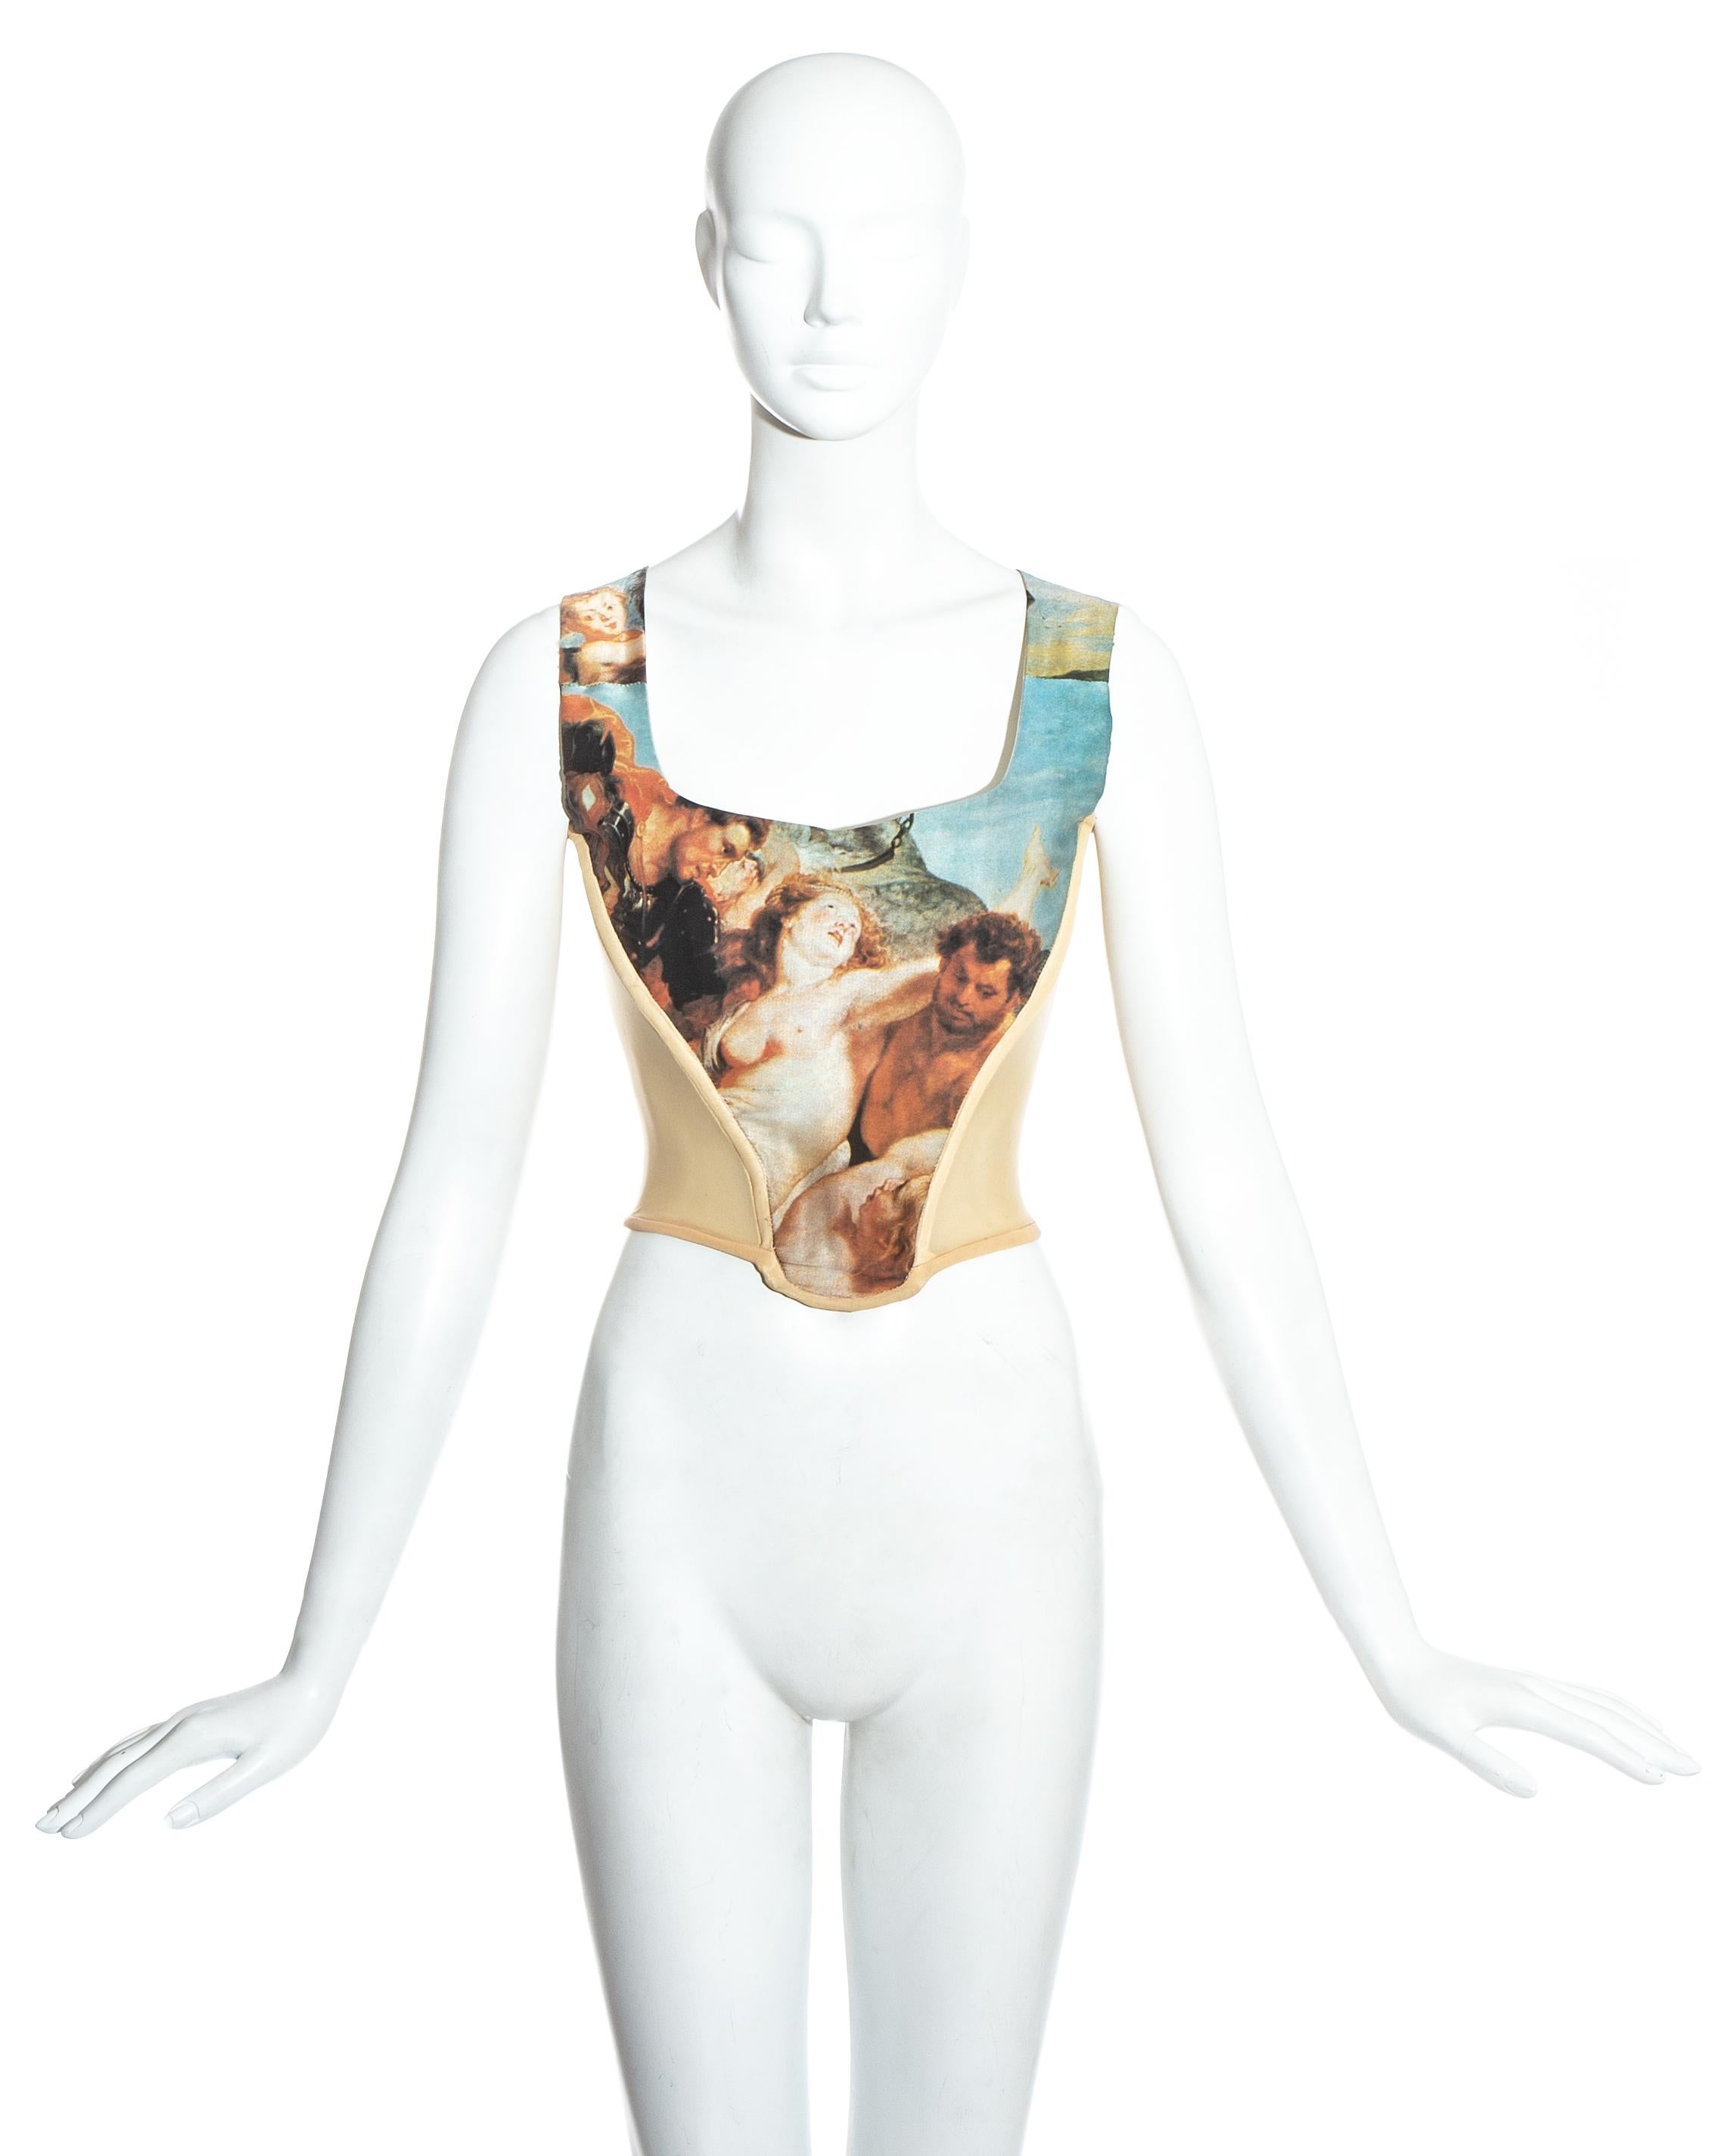 Vivienne Westwood; evening silk corset with 17th century Baroque painting print reproduced from the 'Rape of the Daughters of Leucippus' (1618) by Peter Paul Rubens.
Nude stretch Lycra side panels and internal boning - designed to cinch the waist